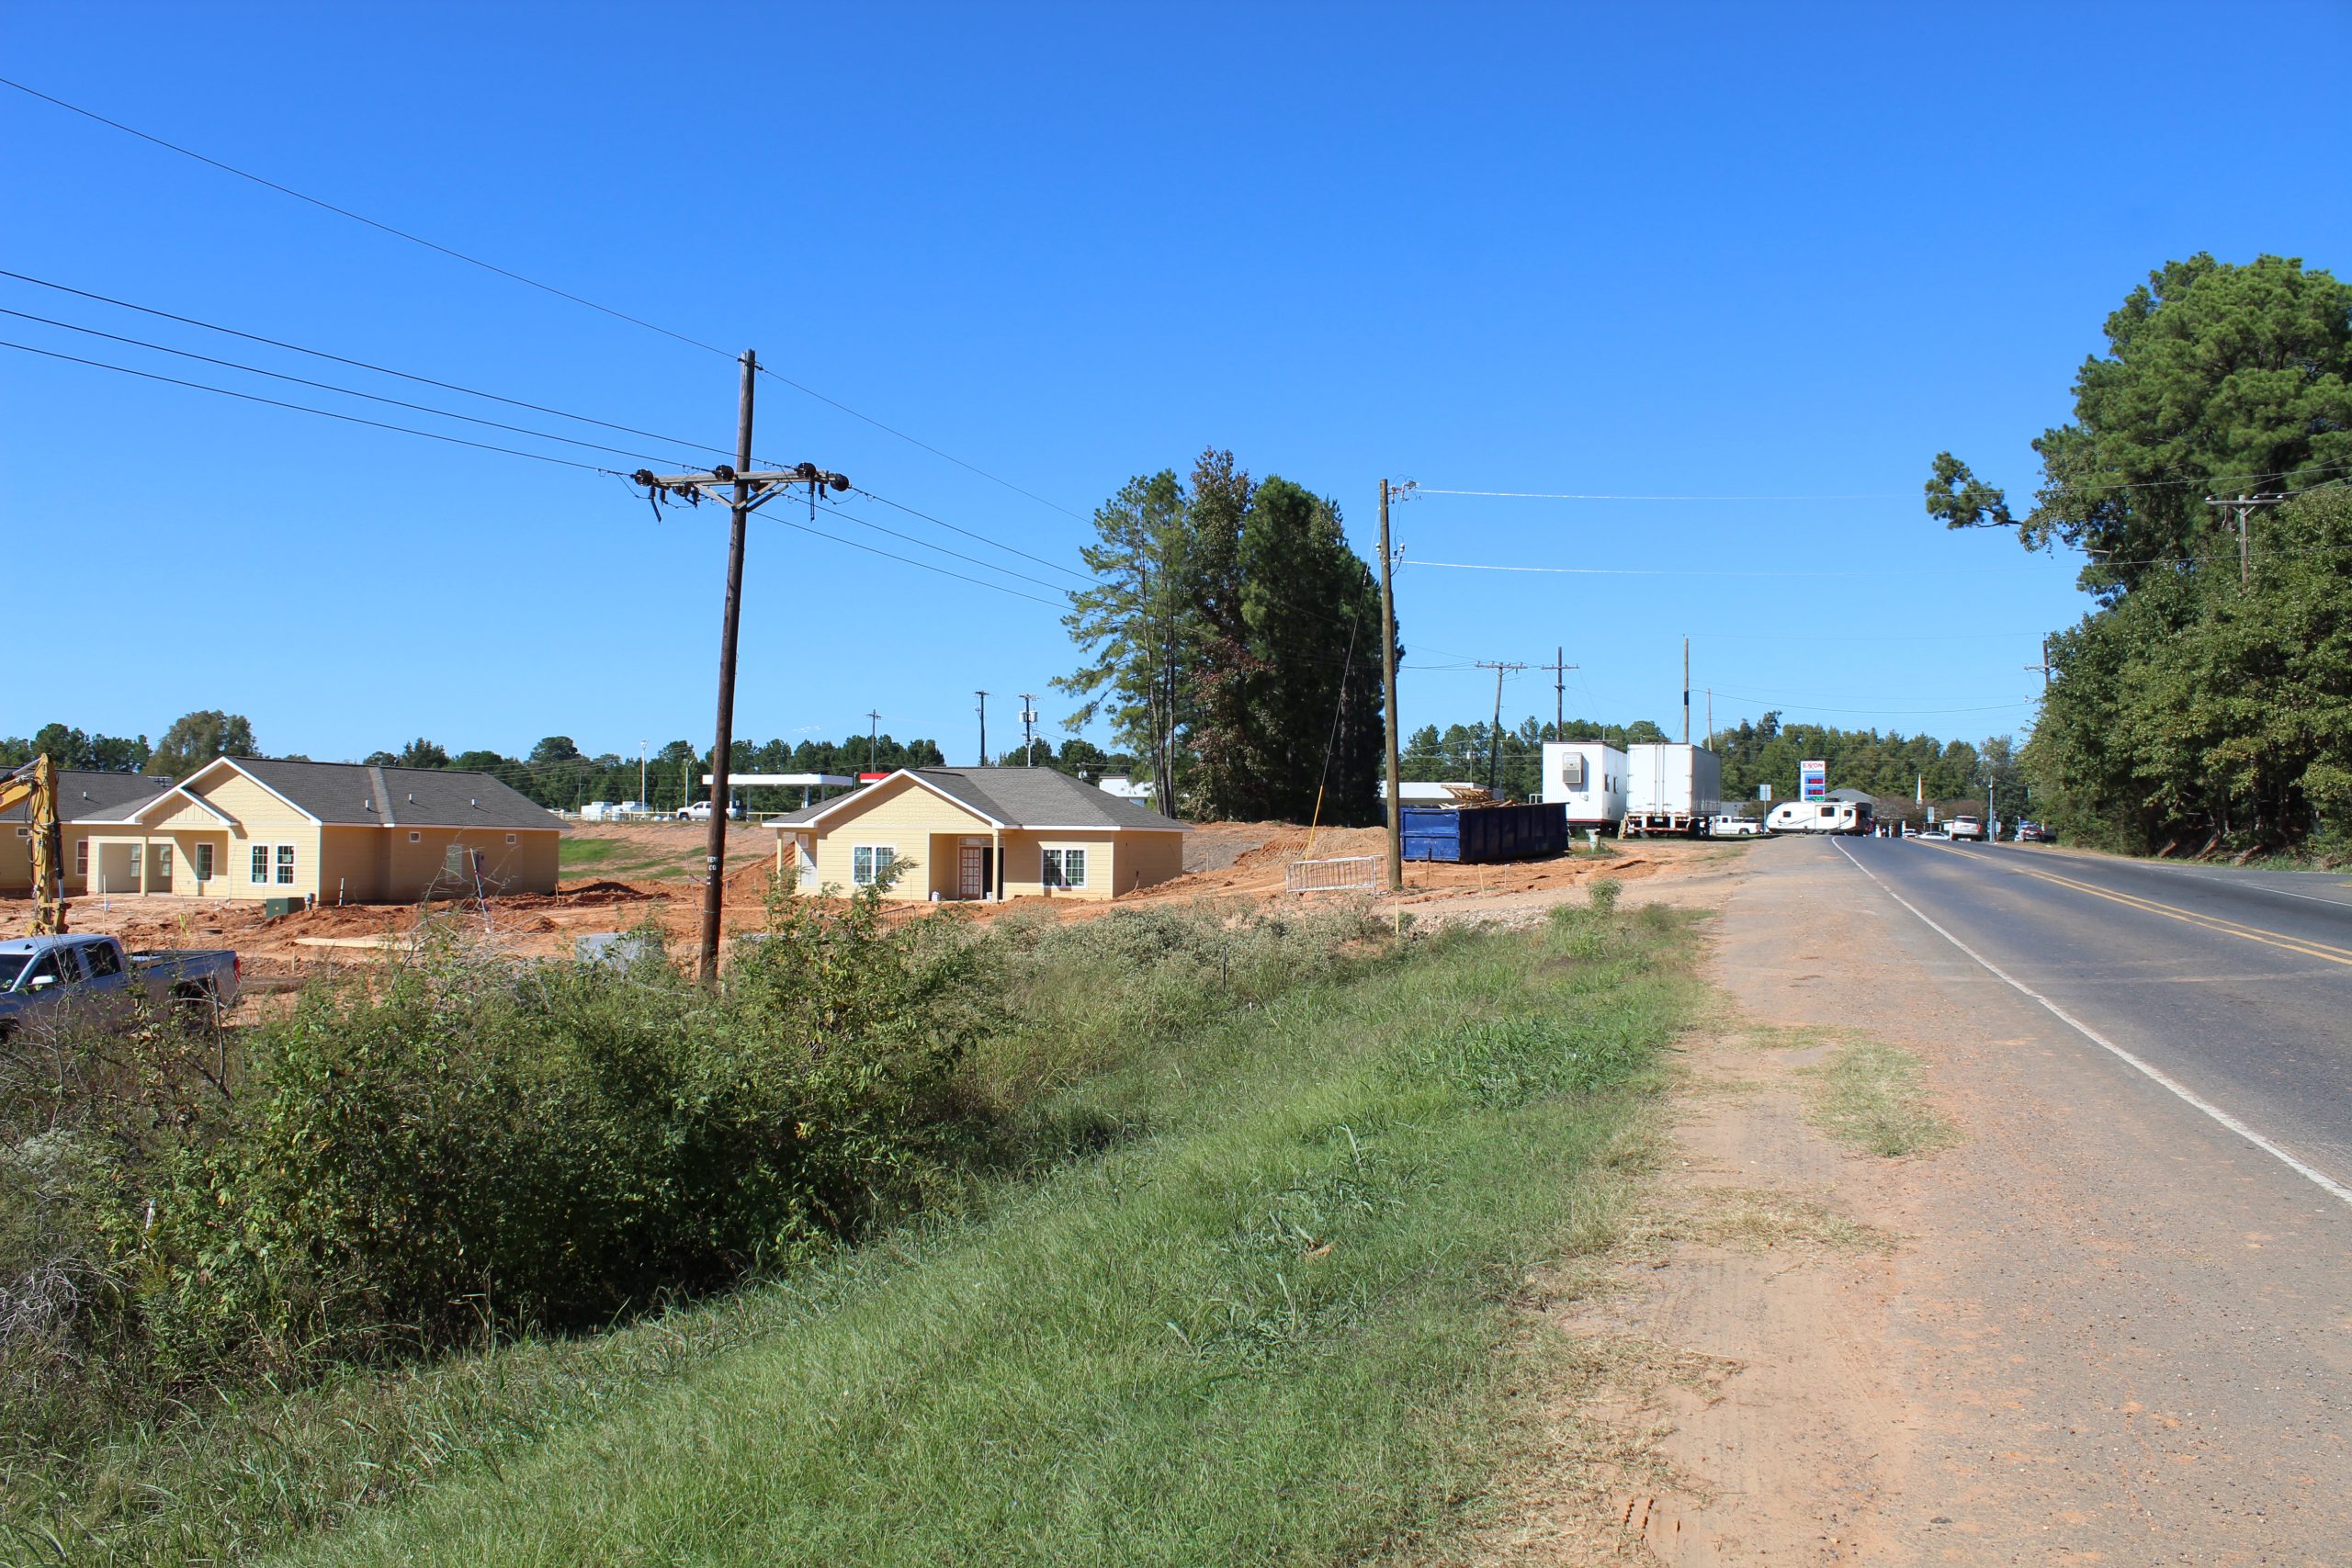 New Housing Subdivision coming to Highway 6 in Natchitoches.